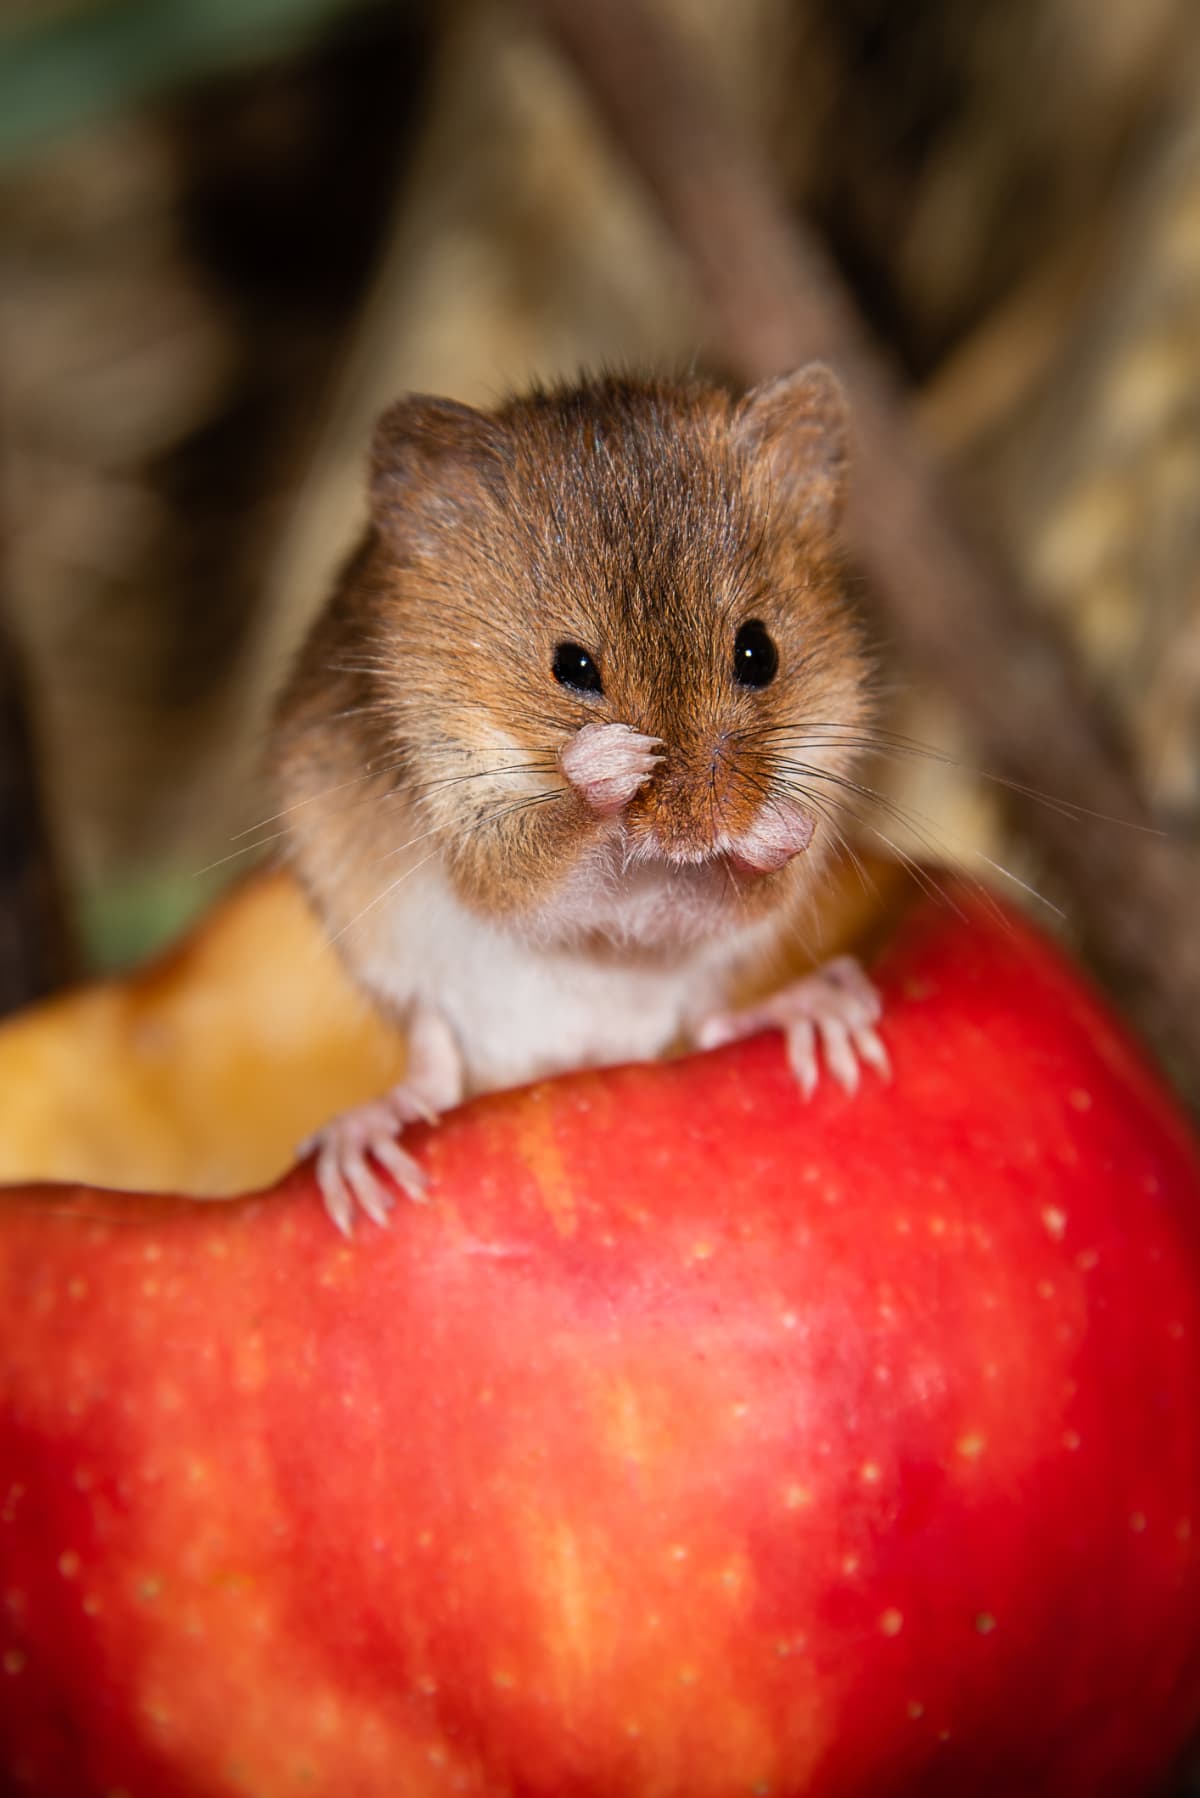 Mouse grooming itself on an apple